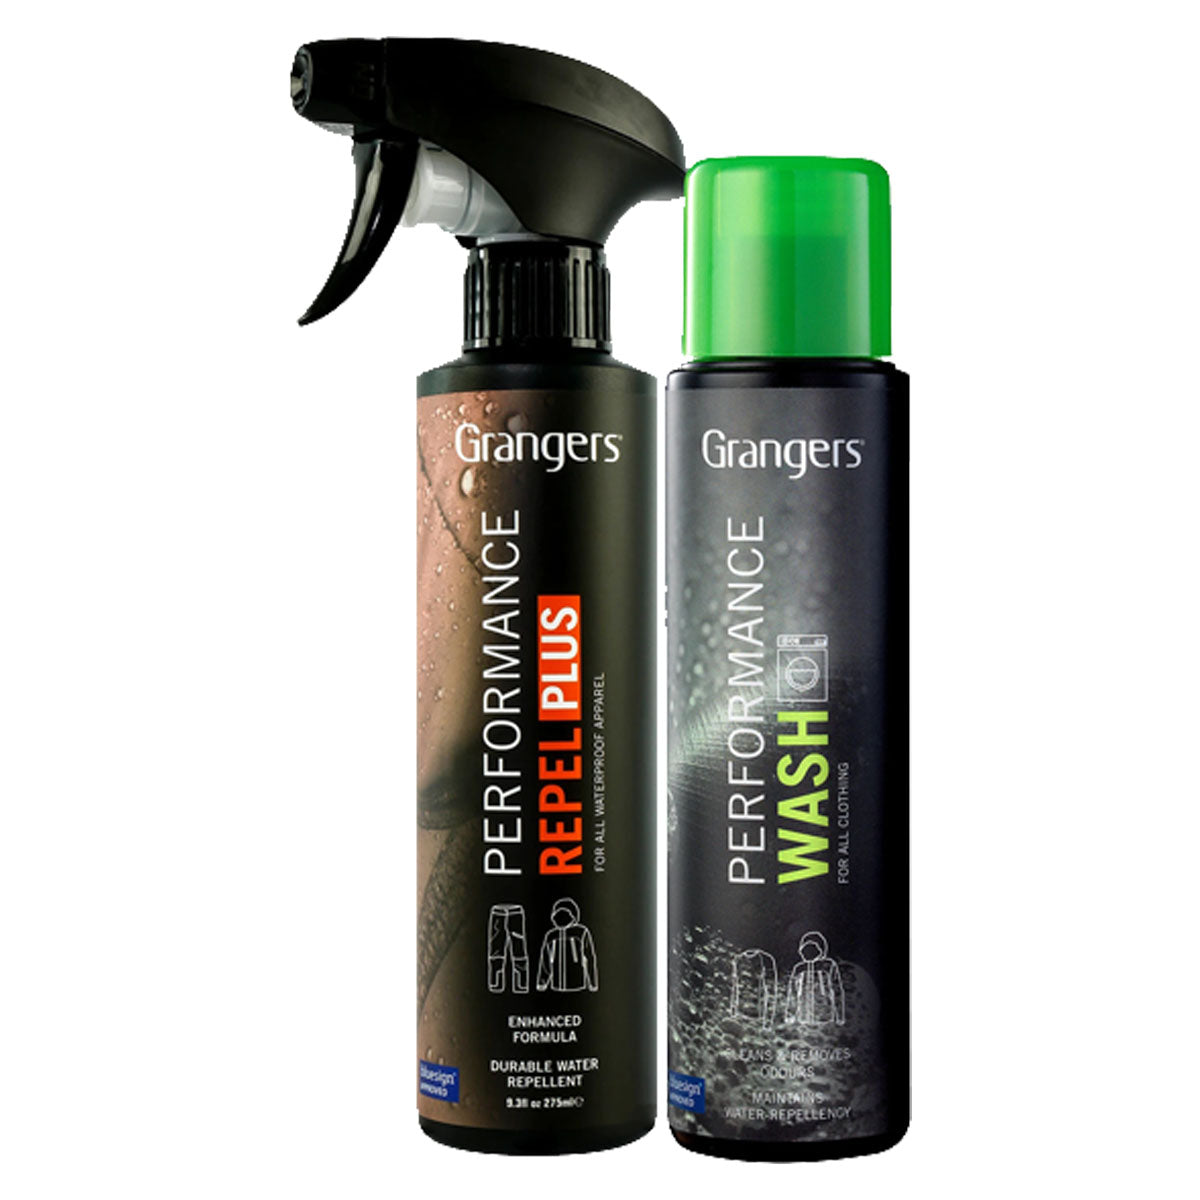 Grangers Performance Repel Plus + Performance Wash Concentrate